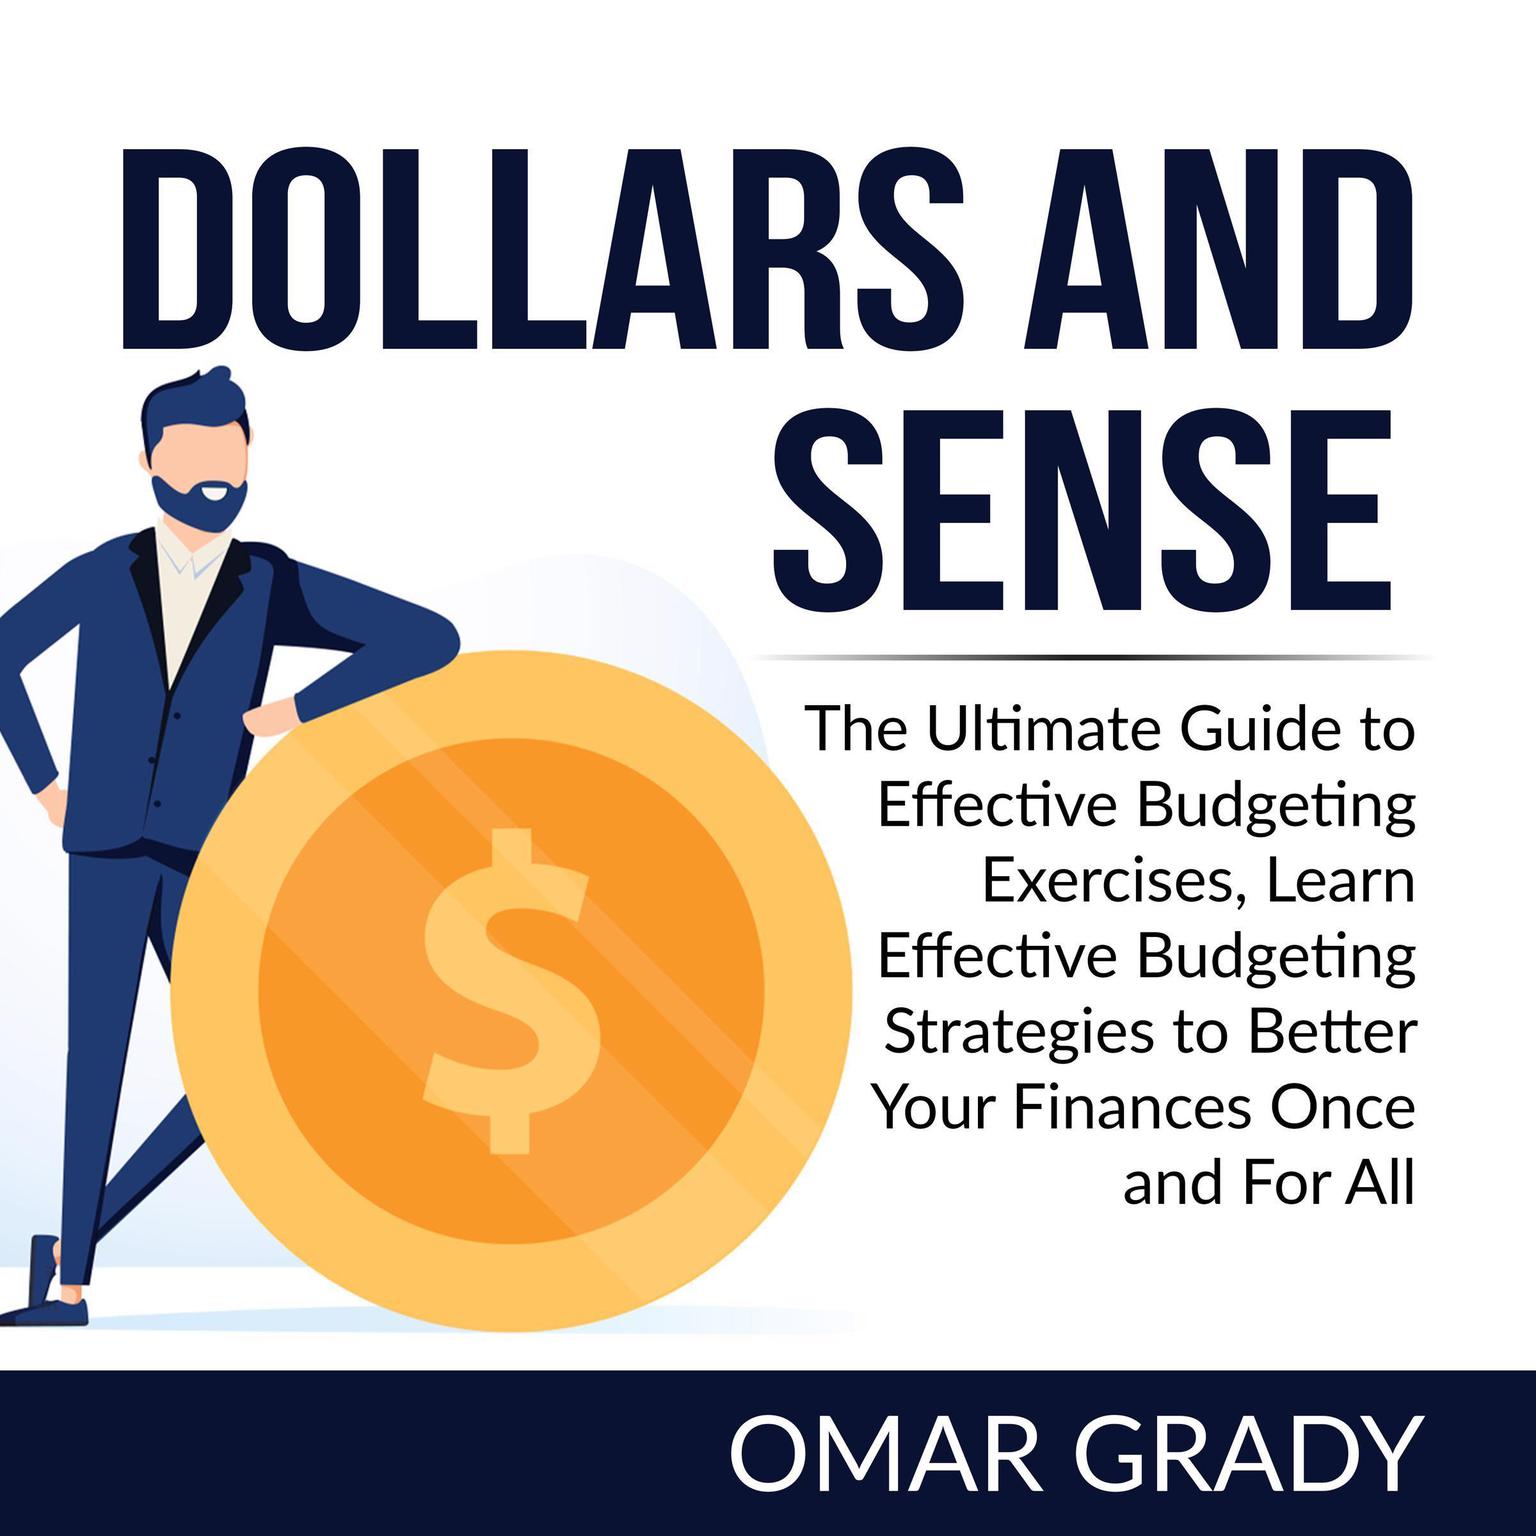 Dollars and Sense: The Ultimate Guide to Effective Budgeting Exercises, Learn Effective Budgeting Strategies to Better Your Finances Once and For All  Audiobook, by Omar Grady